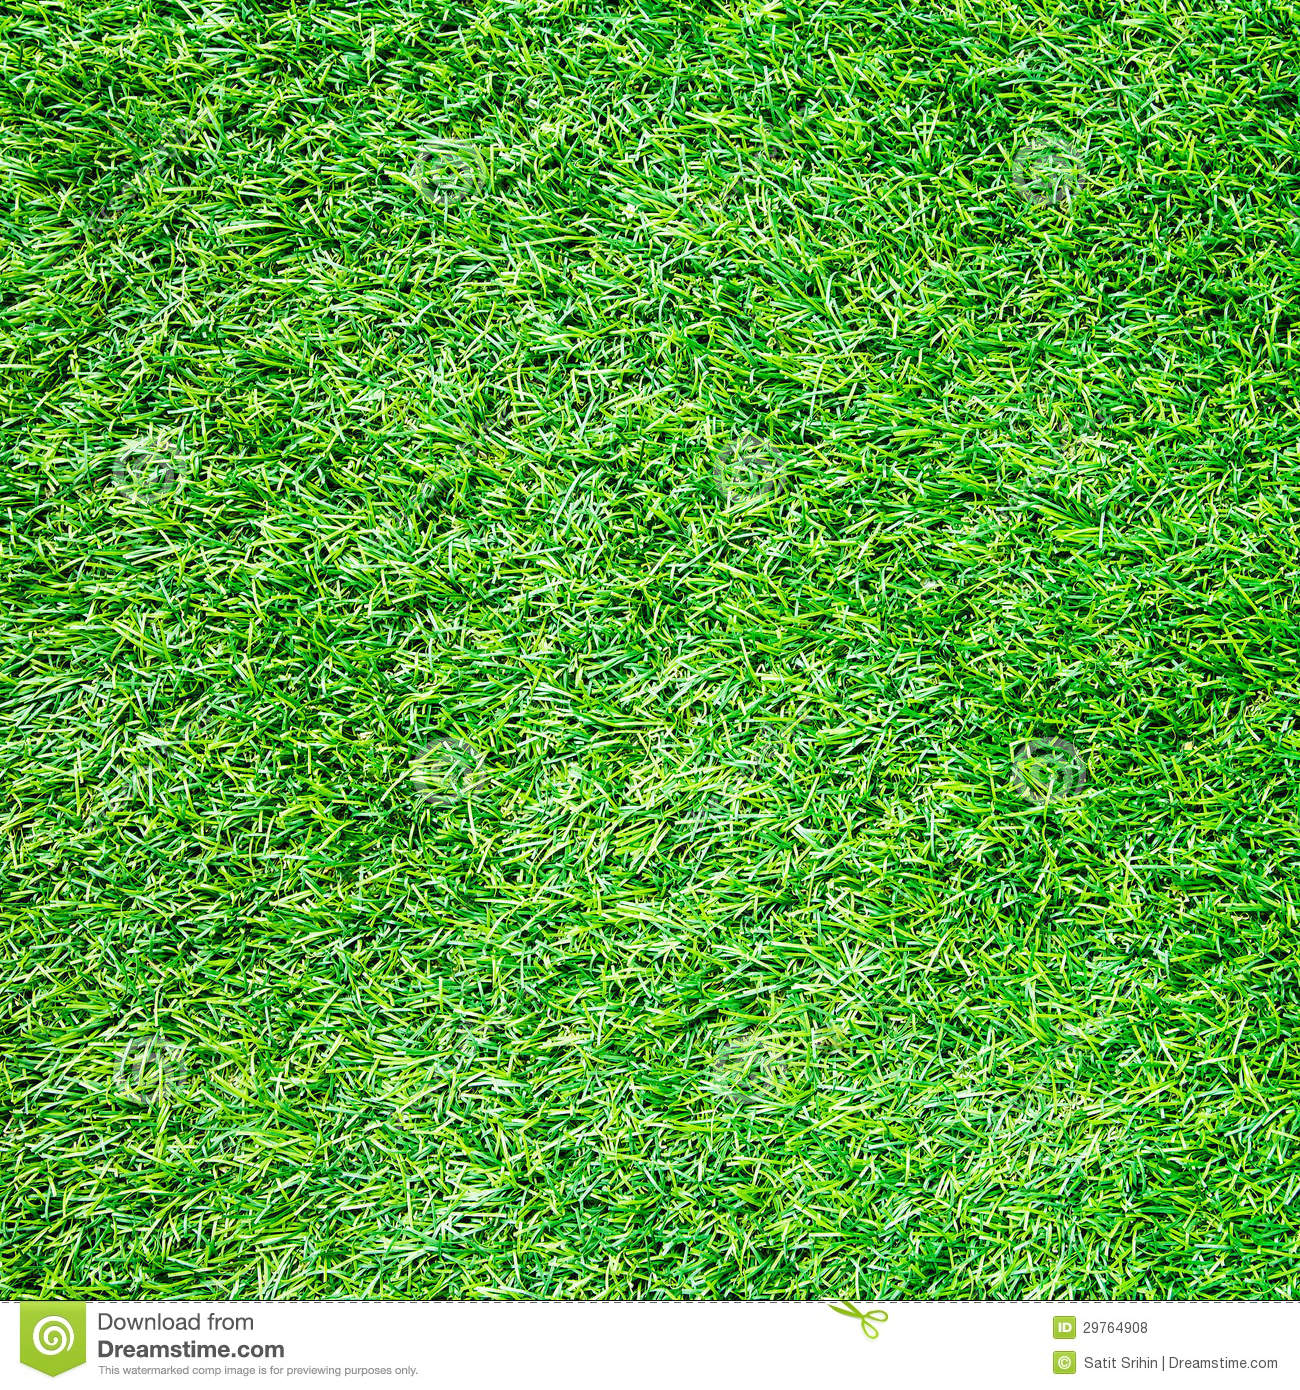 Artificial Grass Field Top View Texture Royalty Free Stock Photos.